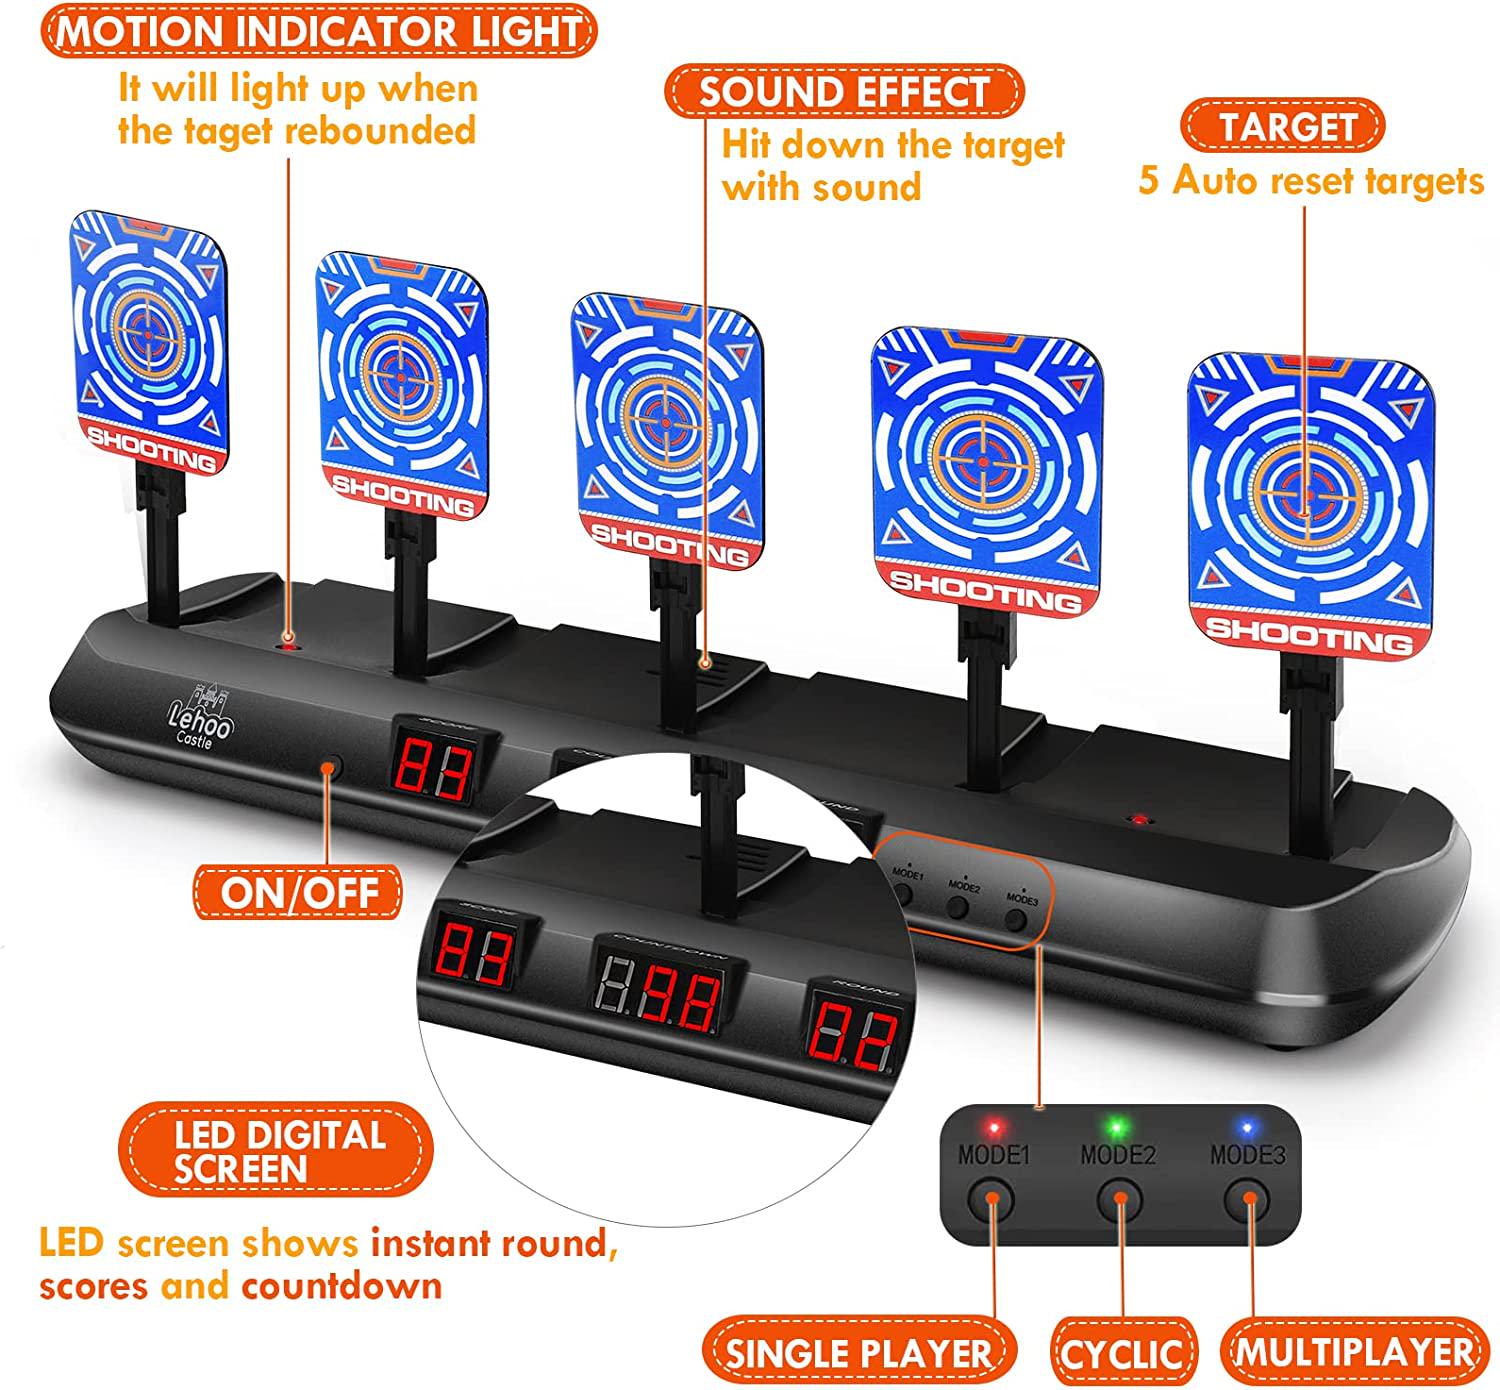 Lehoo Castle, Lehoo Castle Nerf Target, 5 Electronic Digital Target for Nerf Guns, Shooting Targets with Auto-Reset, Scoring Target Includes 20 Bullets, Hand Wrist Bands, Stickers, Outdoor Game for Boys Girls